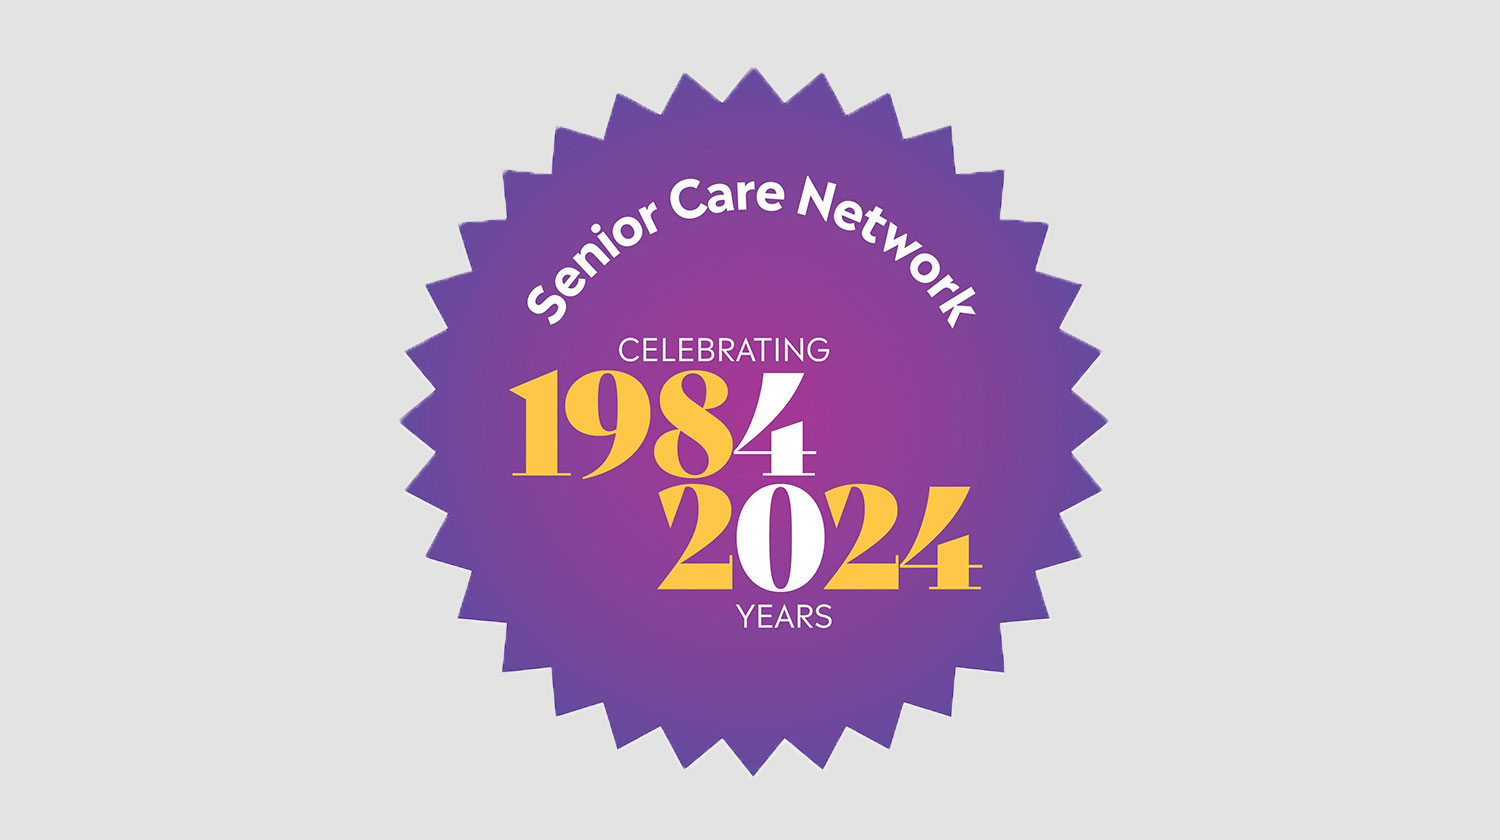 Senior Care Network: Celebrating 40 years of service to our community